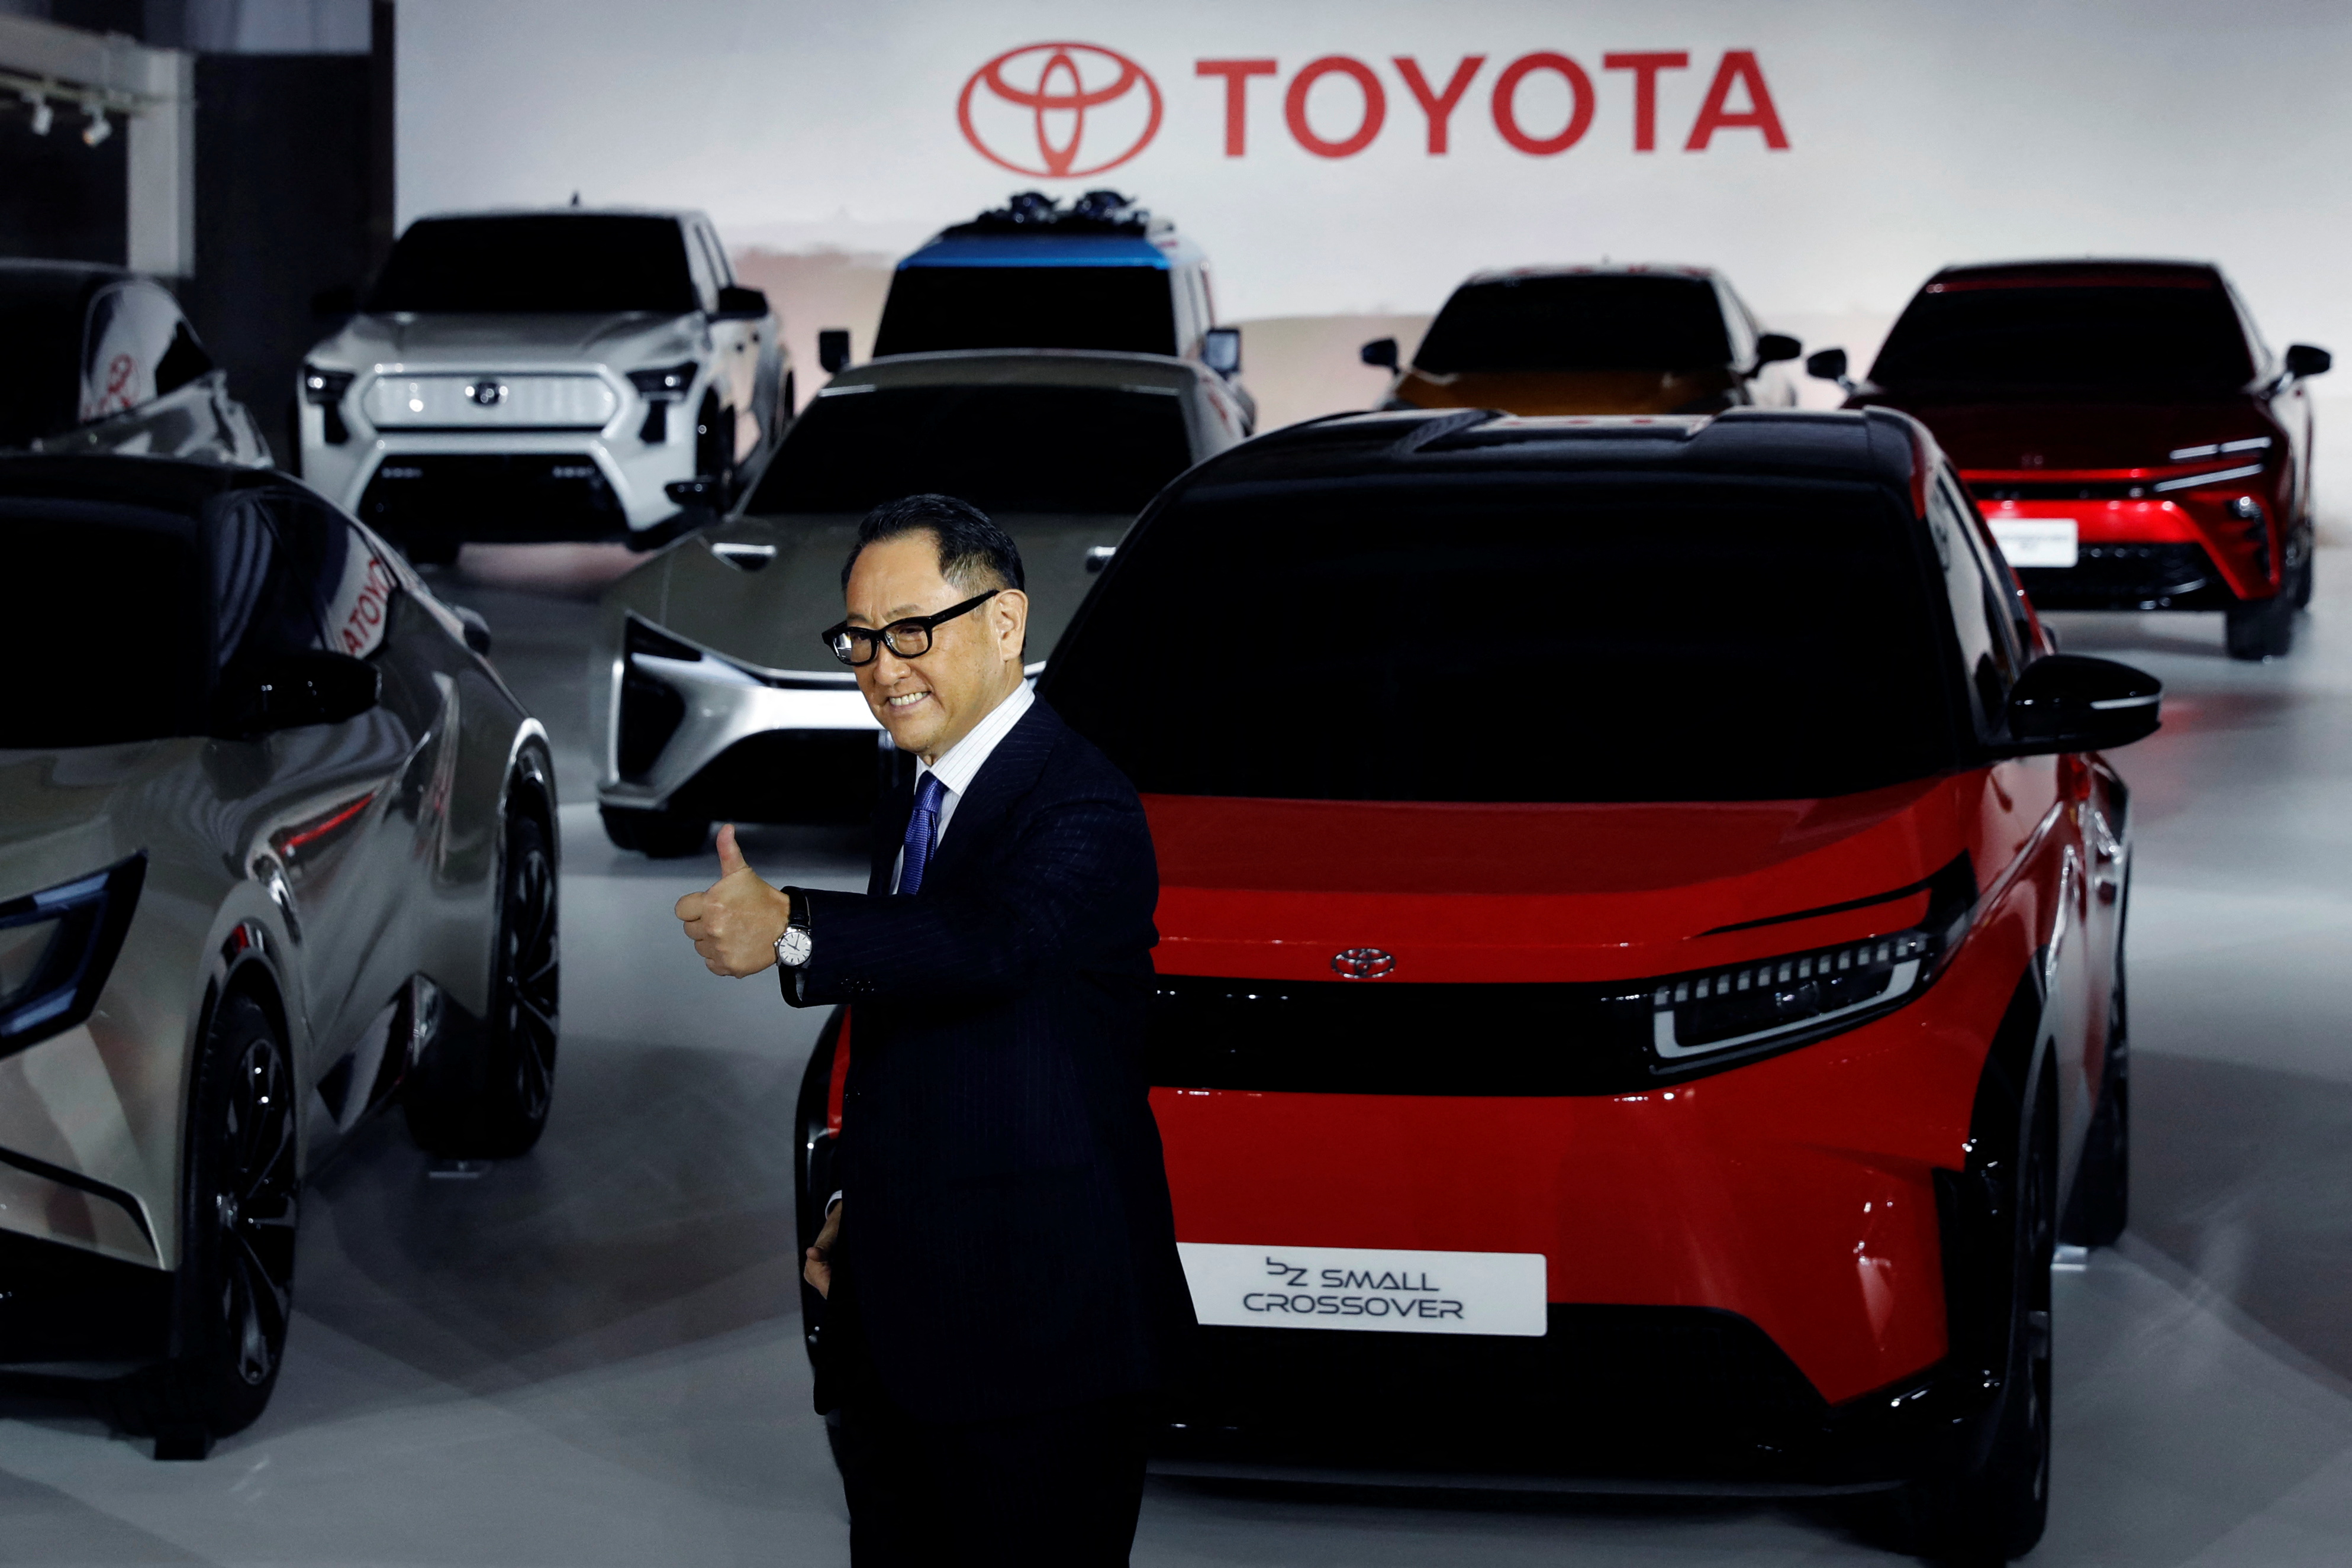 Akio Toyoda, President and CEO of Toyota Motor Corporation, during the launch of the company's electric plans in December 2021